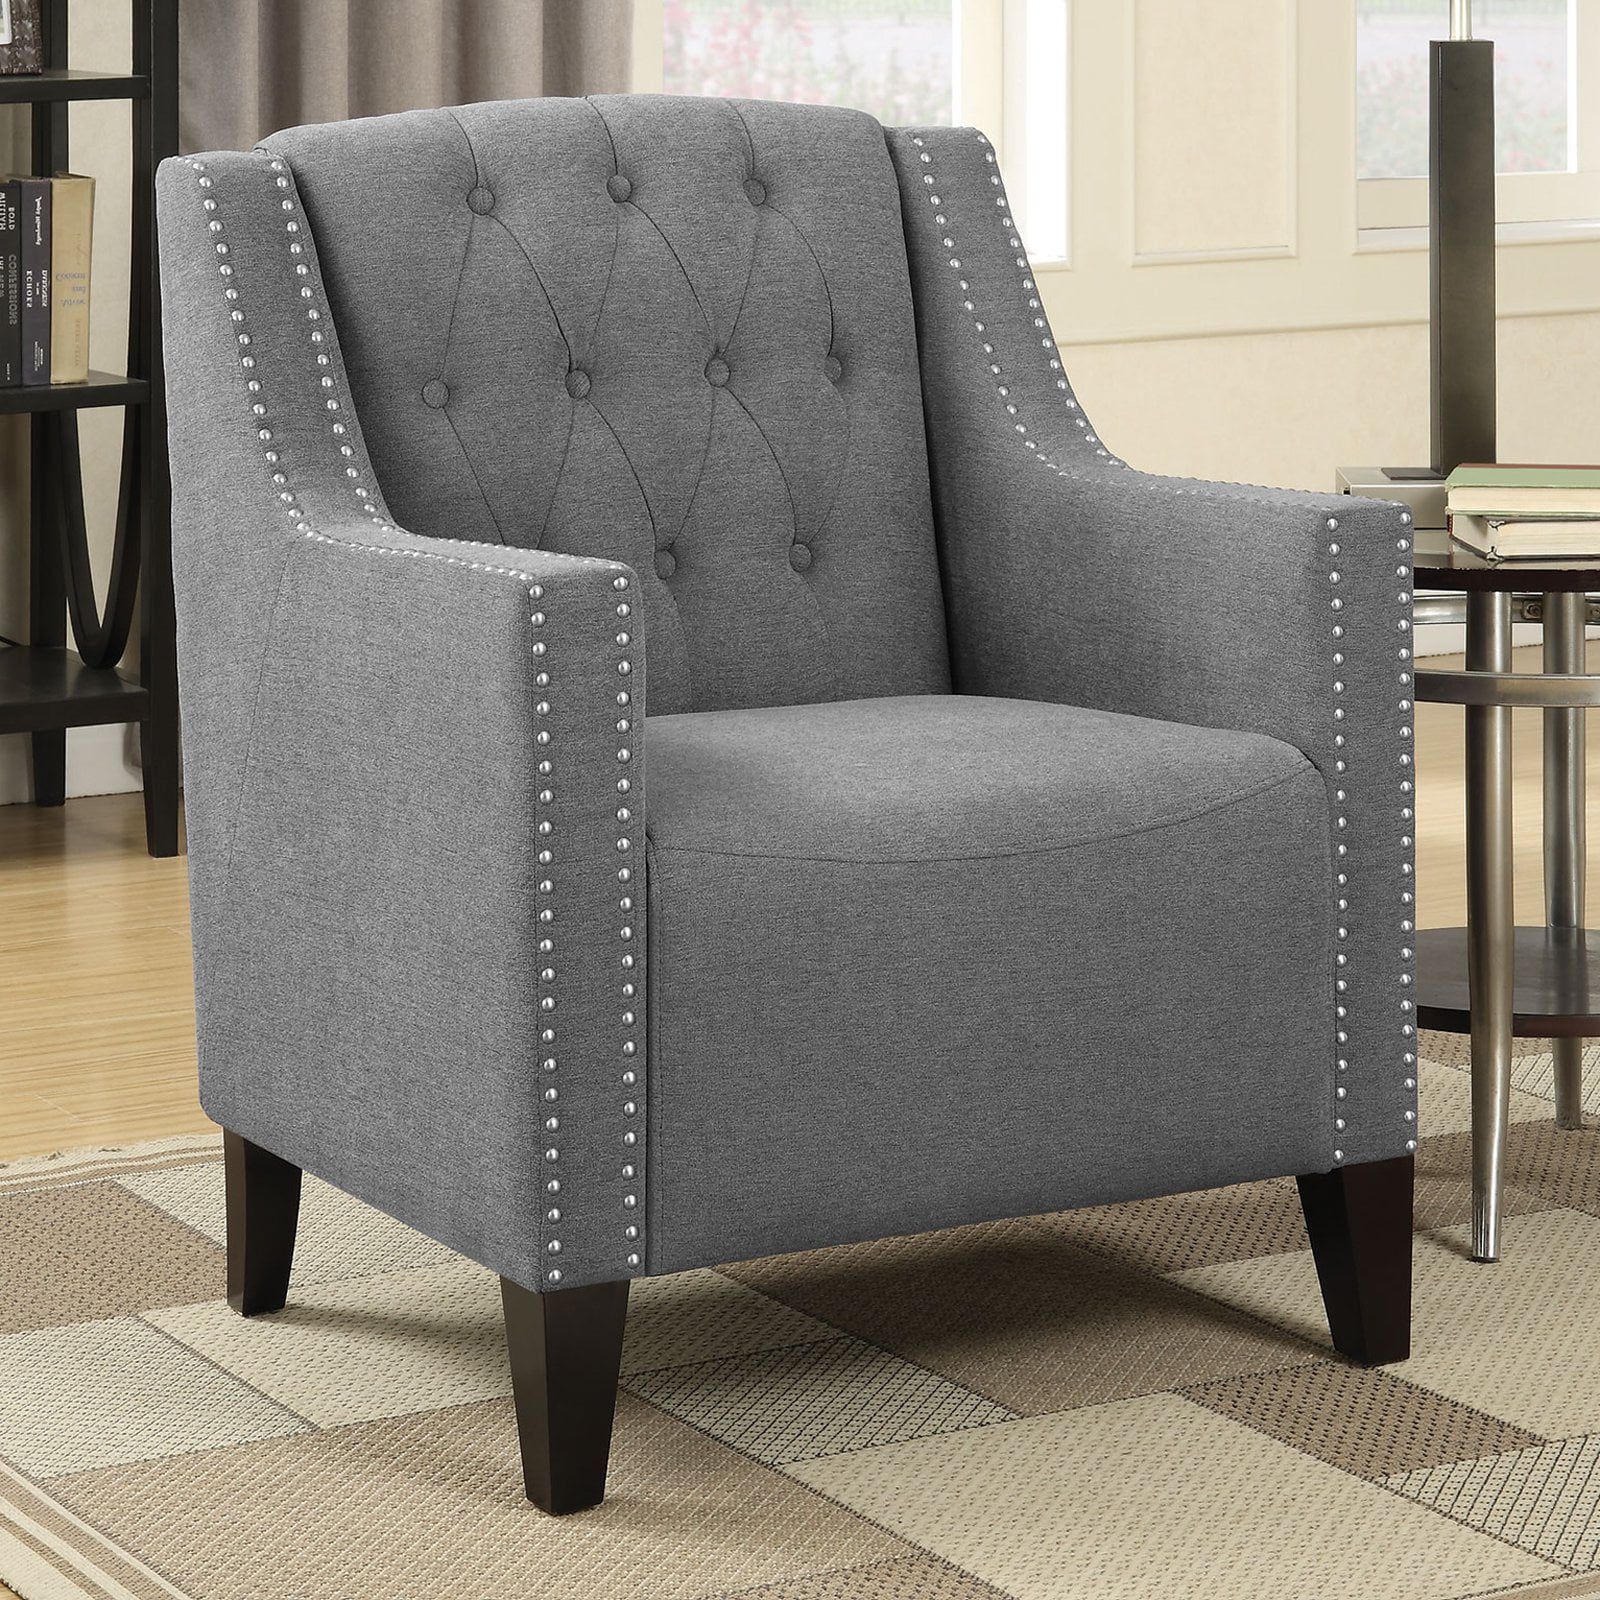 Coaster Upholstered Tufted Accent Chair in Smoke Gray and Black